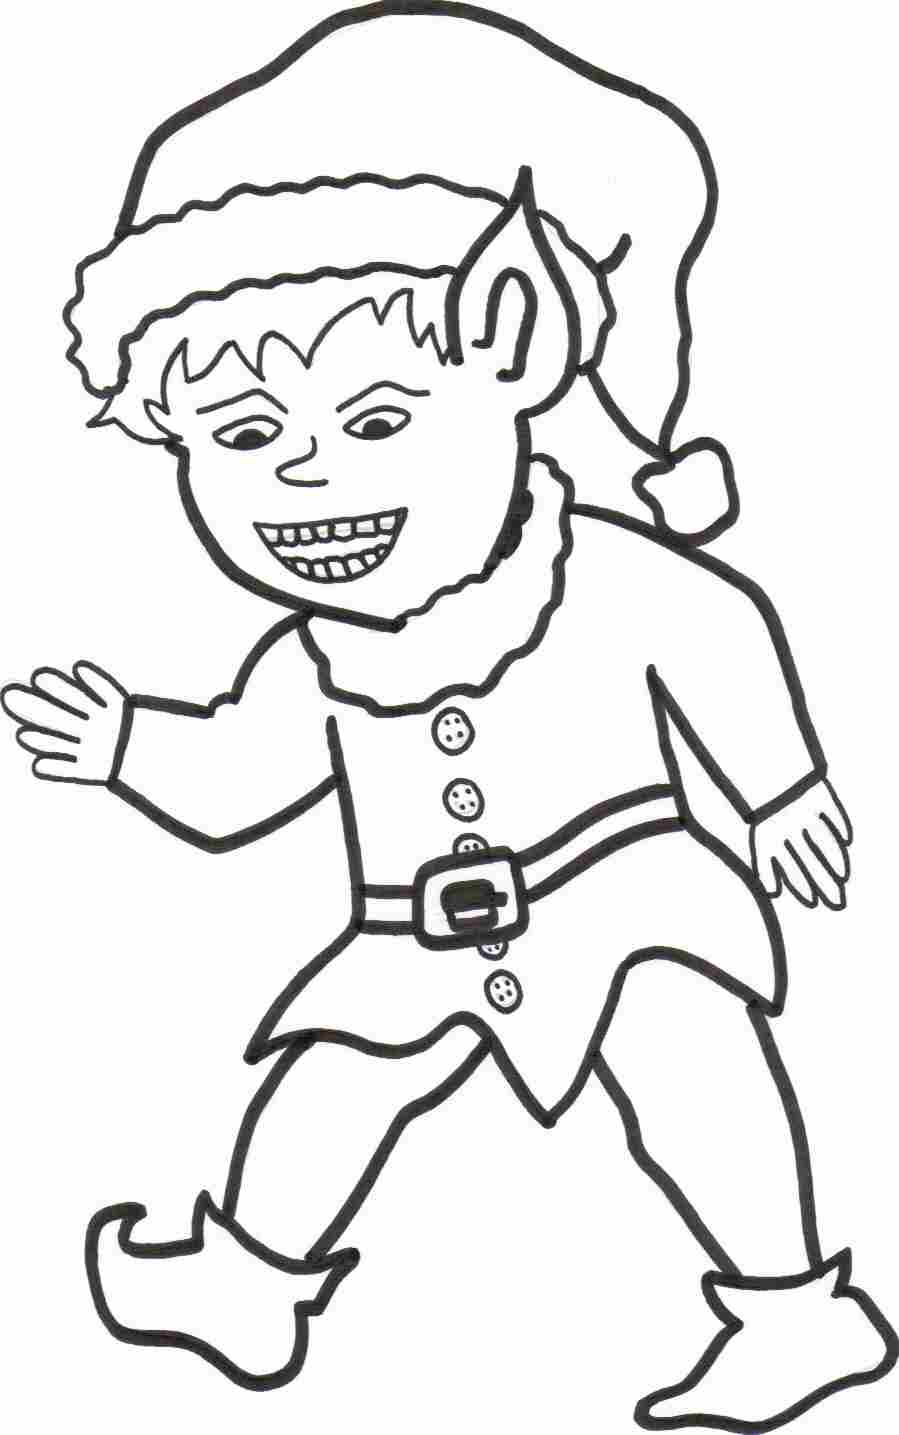 8 Pics of Elf Coloring Pages - Christmas Elves Coloring Pages ...